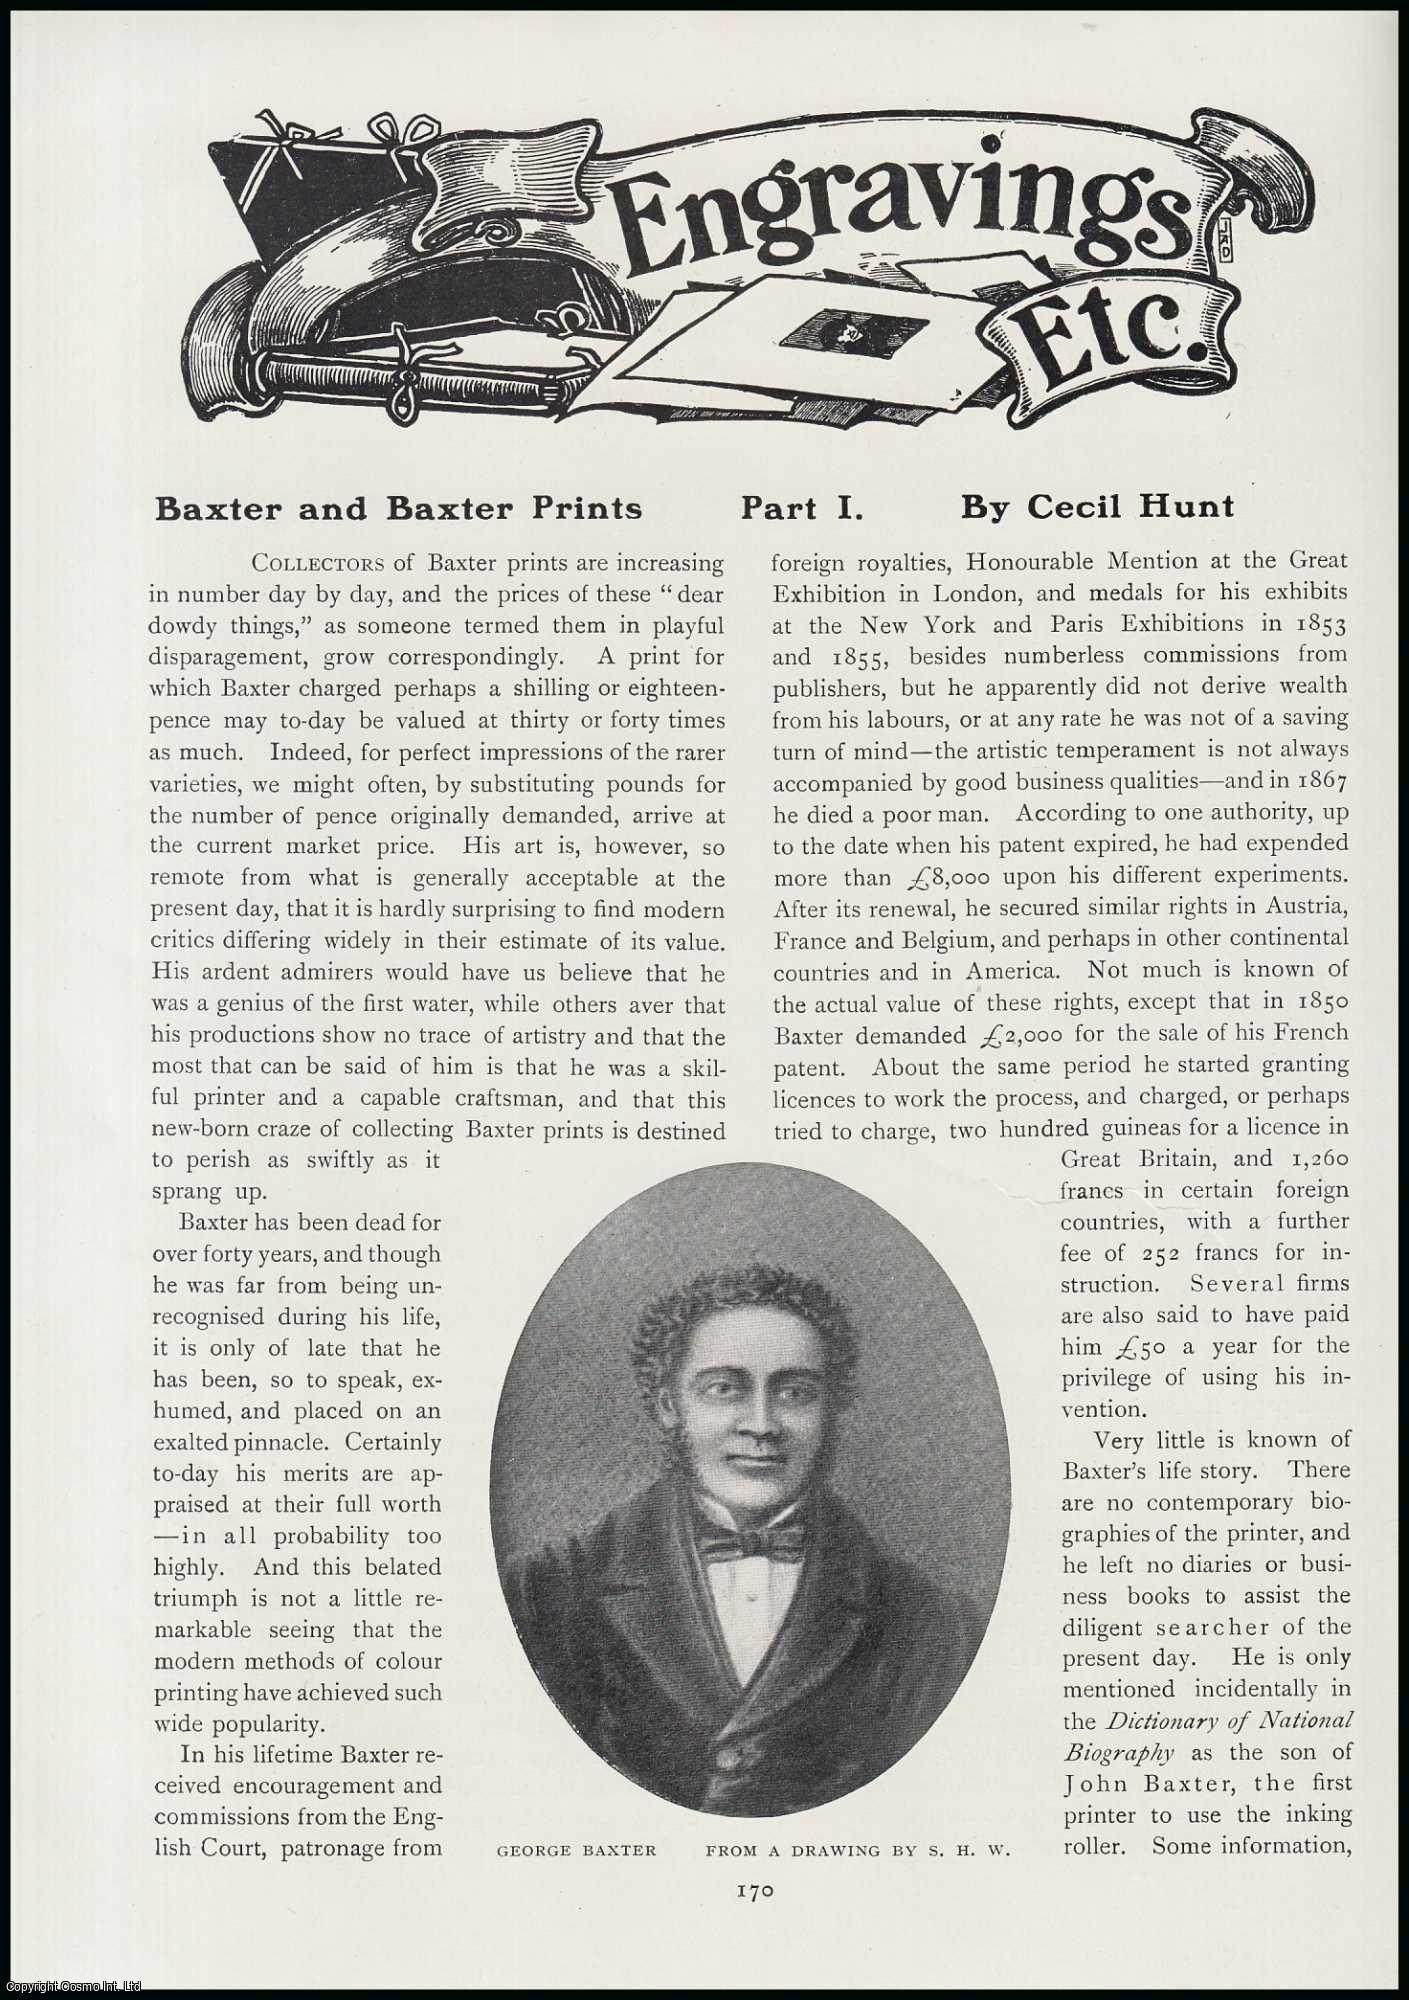 Cecil Hunt - George Baxter (artist) & George Baxter Prints. An original article from The Connoisseur, 1910.